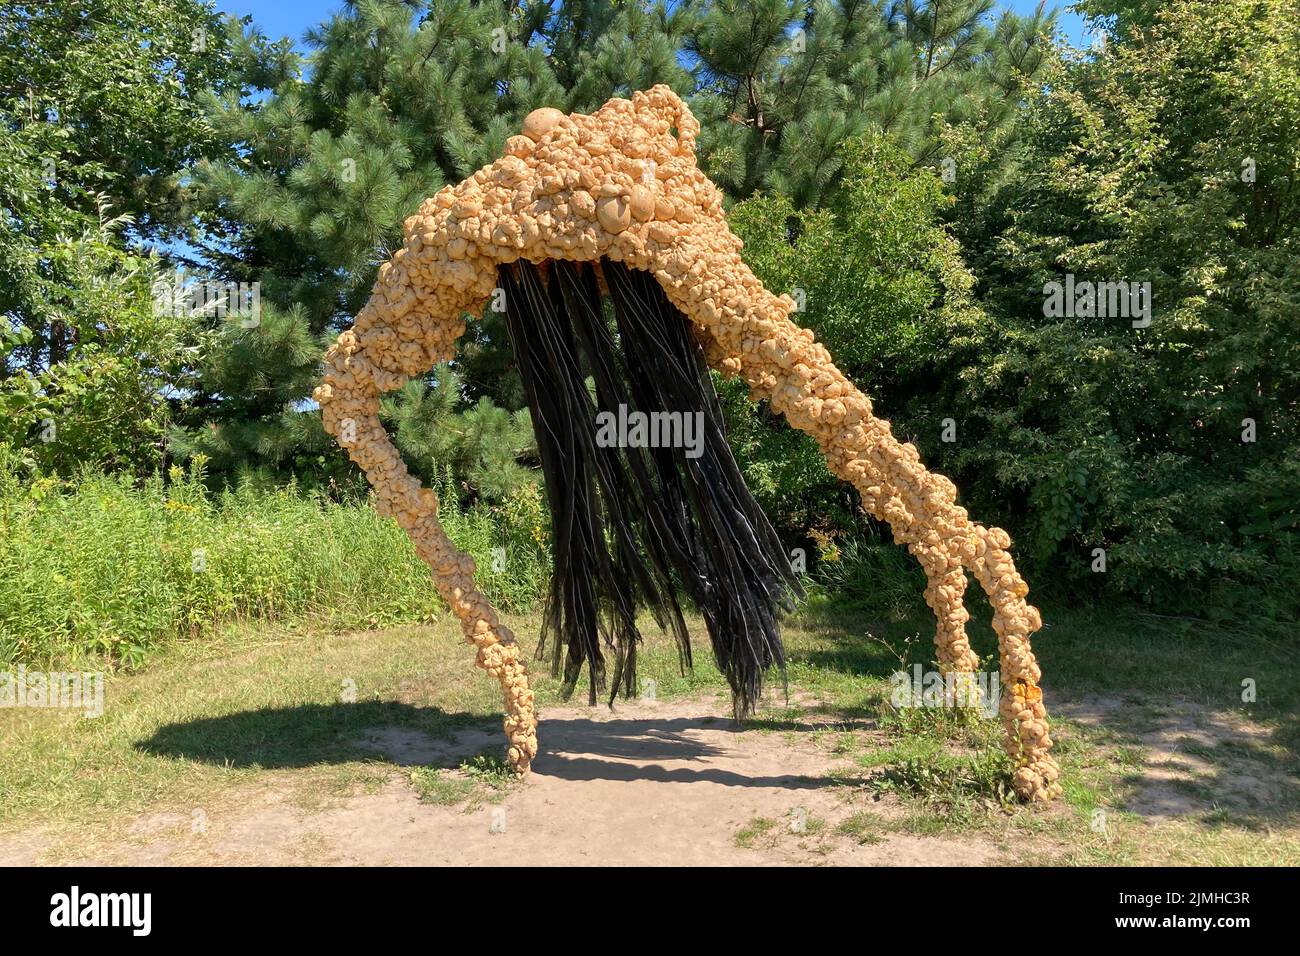 FRANCONIA, MN, USA - AUGUST 5, 2022: A Pink Eyed Grazer at Franconia Sculpture Park. Stock Photo